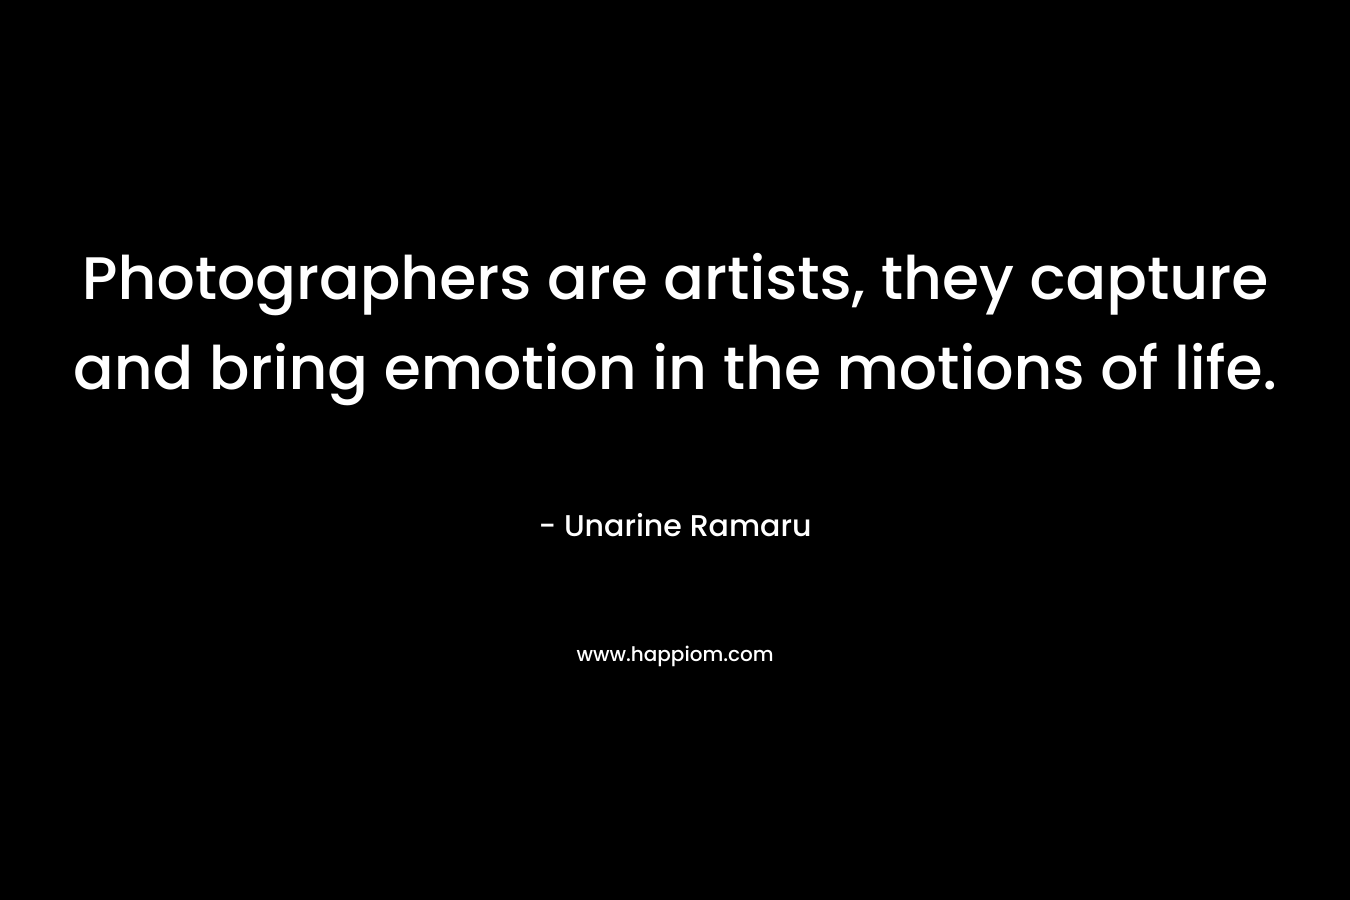 Photographers are artists, they capture and bring emotion in the motions of life. – Unarine Ramaru